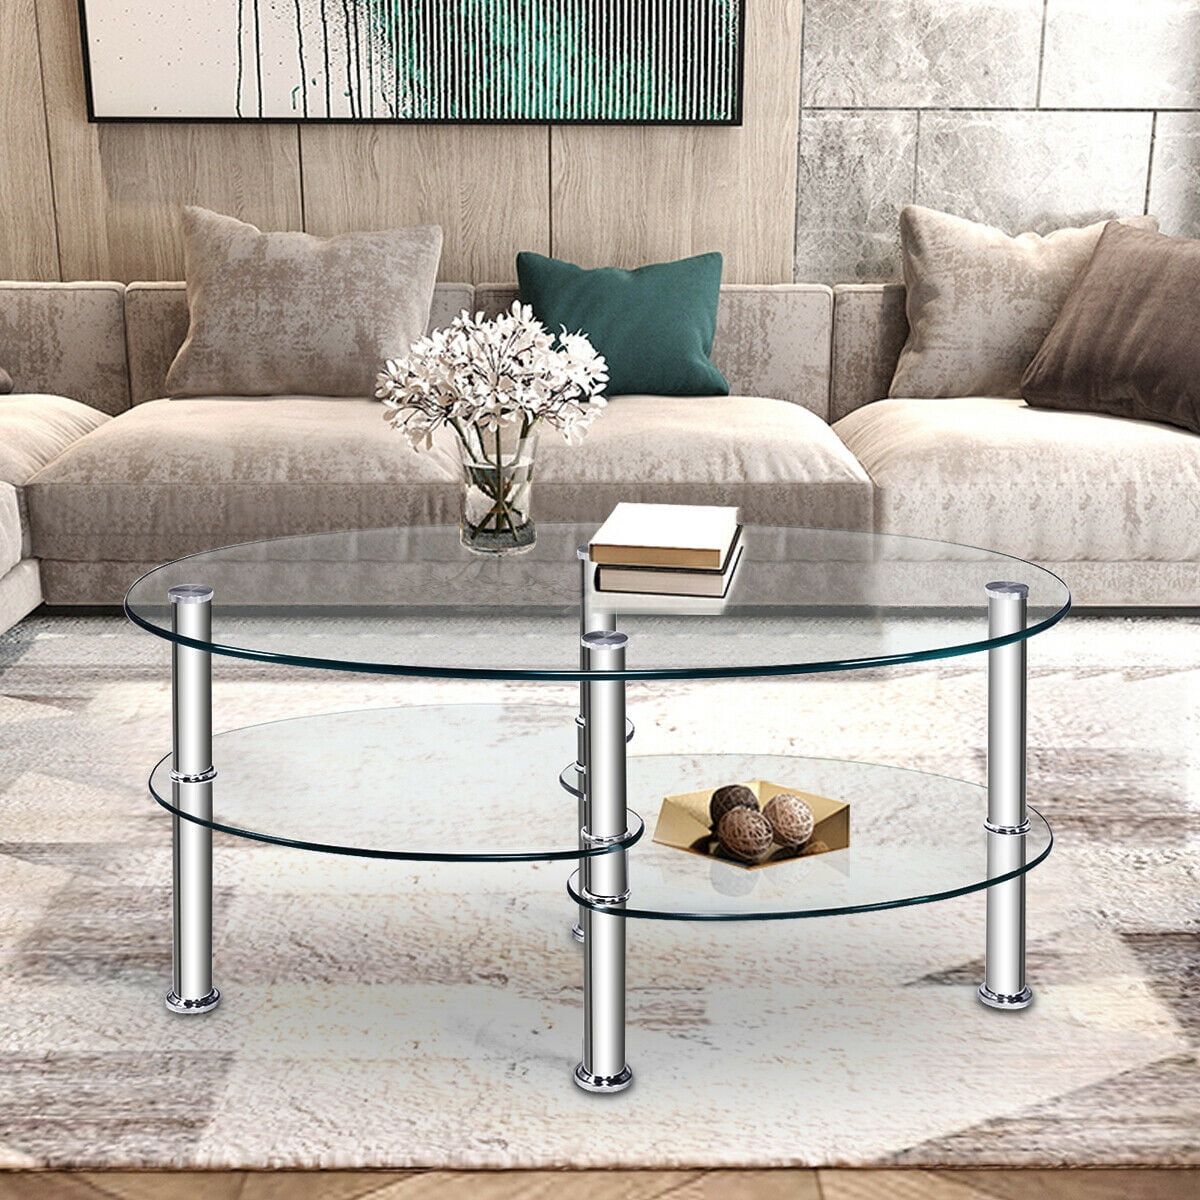 Costway Tempered Glass Oval Side Coffee Table Shelf Chrome Base Living Regarding Glass Coffee Tables With Lower Shelves (View 15 of 20)